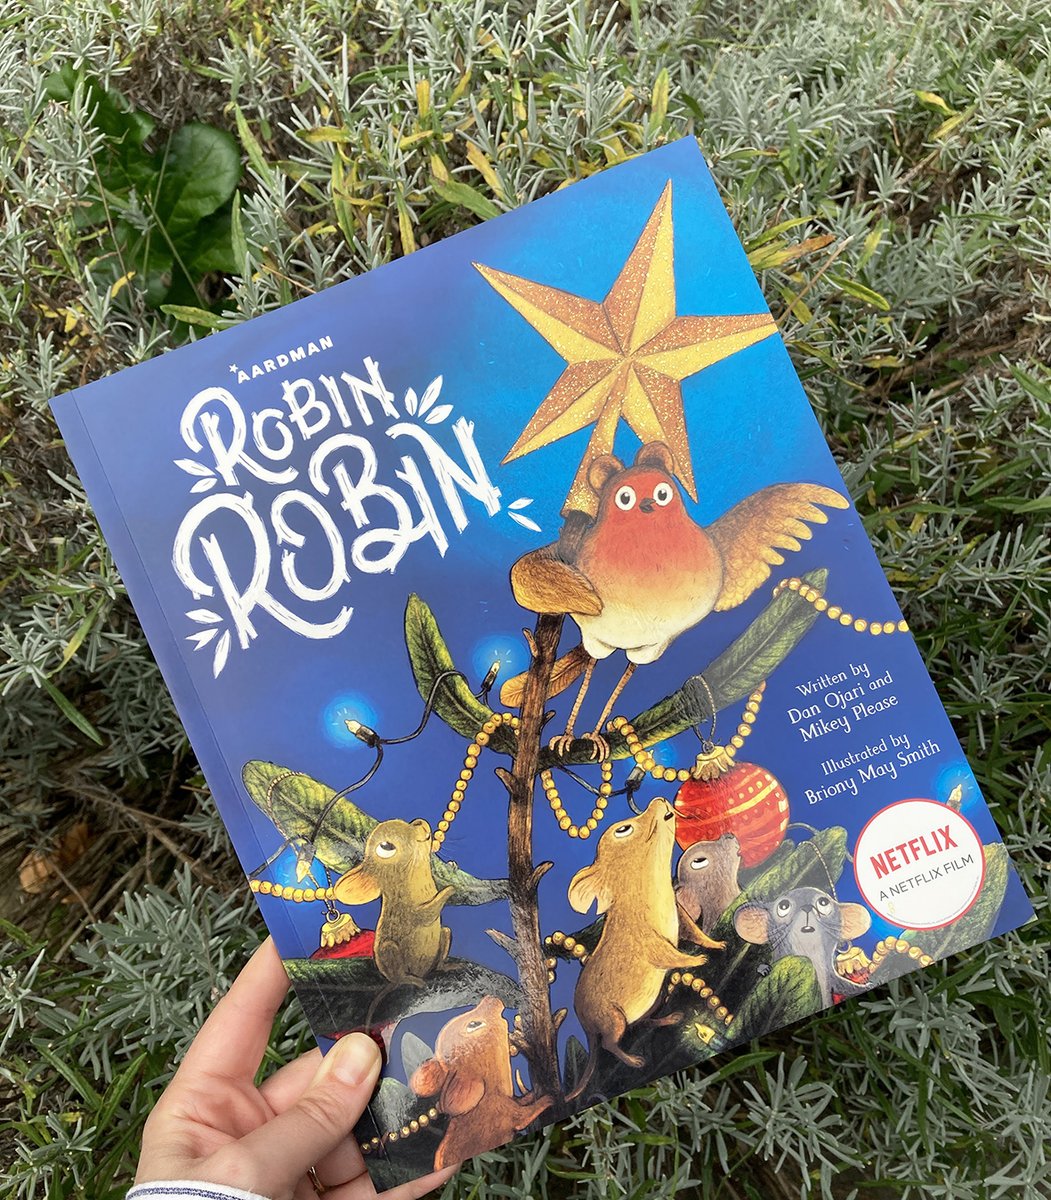 It's publication day for the gorgeous paperback edition of Robin Robin by @DanOjari and @MisterPlease, complete with the loveliest illustrations from @BrionyMaySmith – inspired by the brilliant @netflix @aardman Christmas film, Robin Robin panmacmillan.com/authors/daniel…